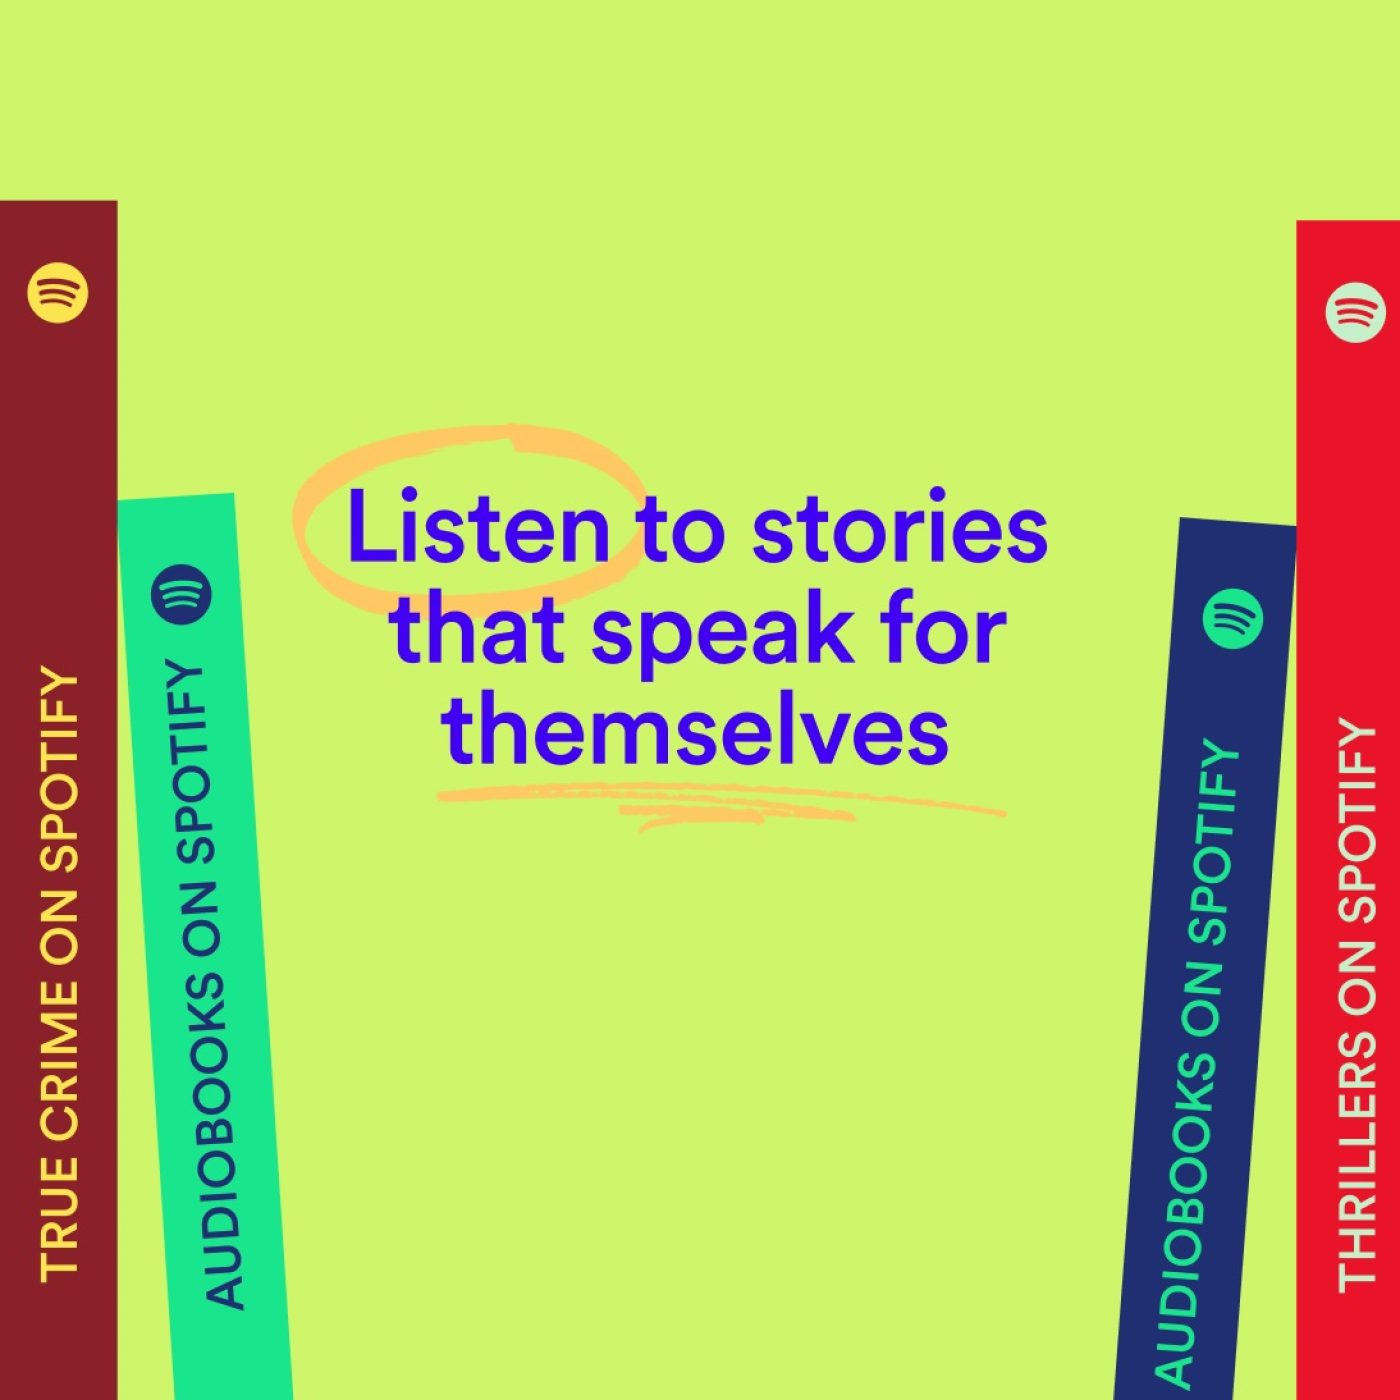 Spotify Premium Subscribers Get Access to 150K Audiobooks - Subscription  Insider